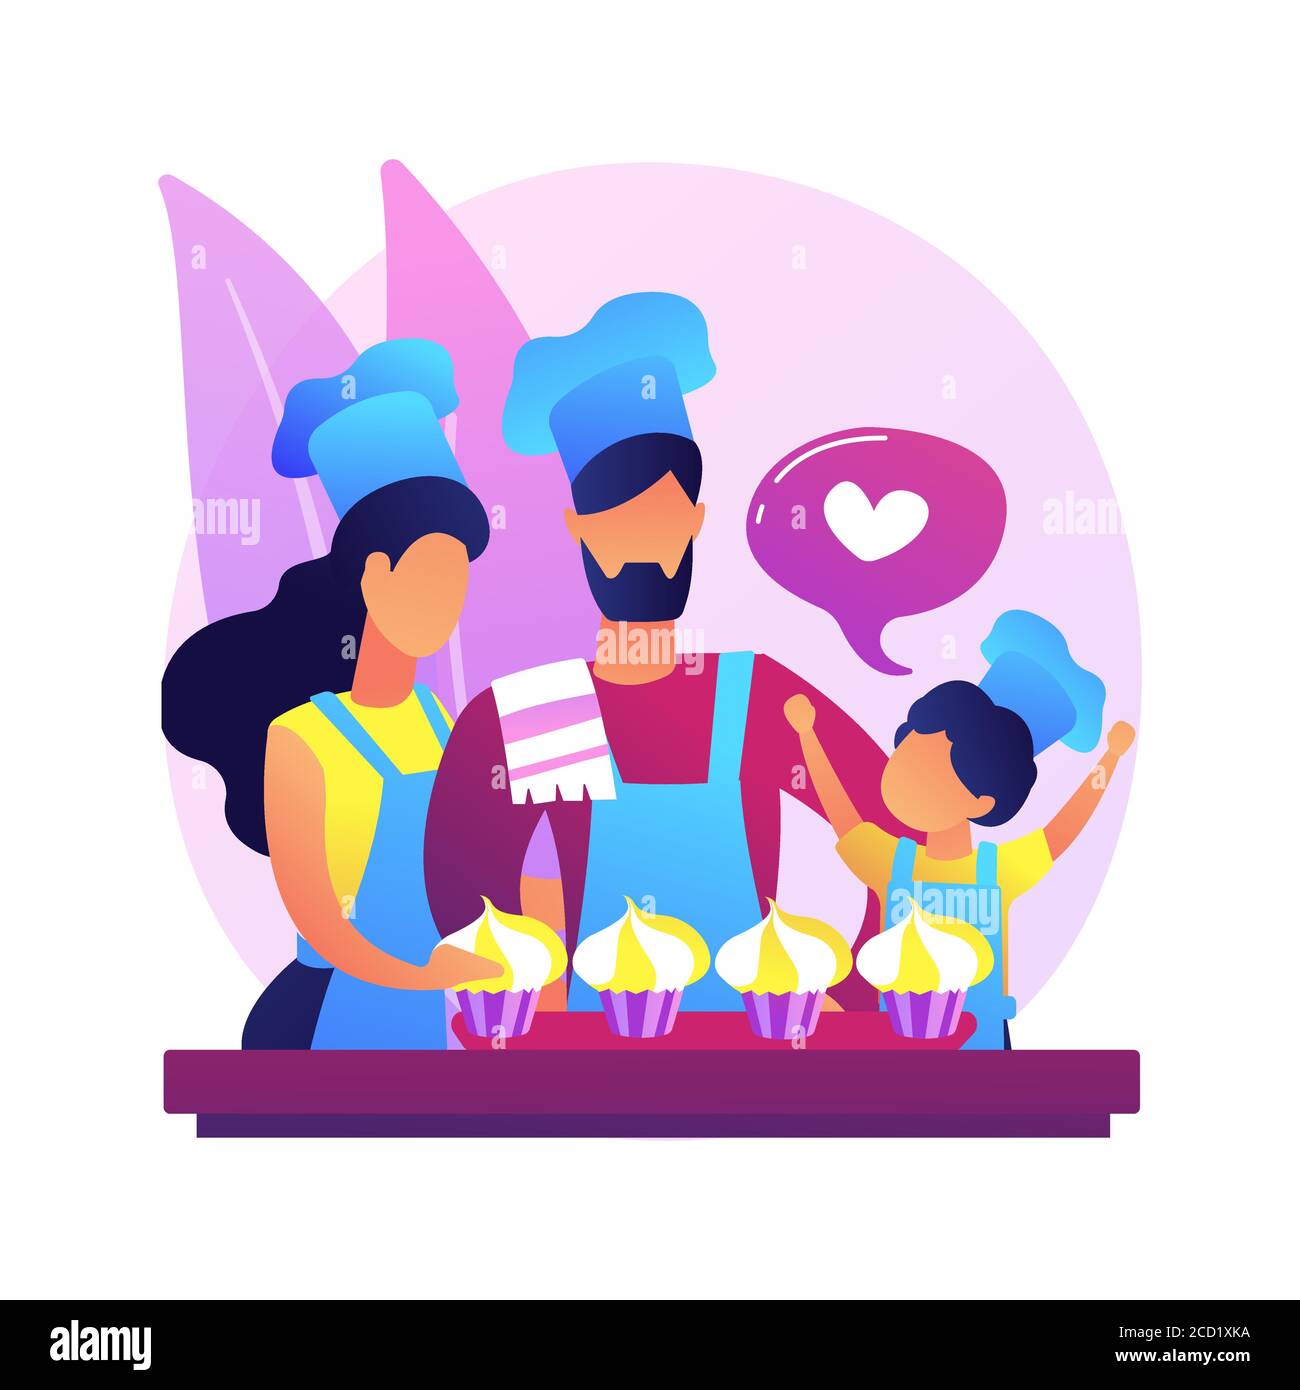 Bake together abstract concept vector illustration. Stock Vector